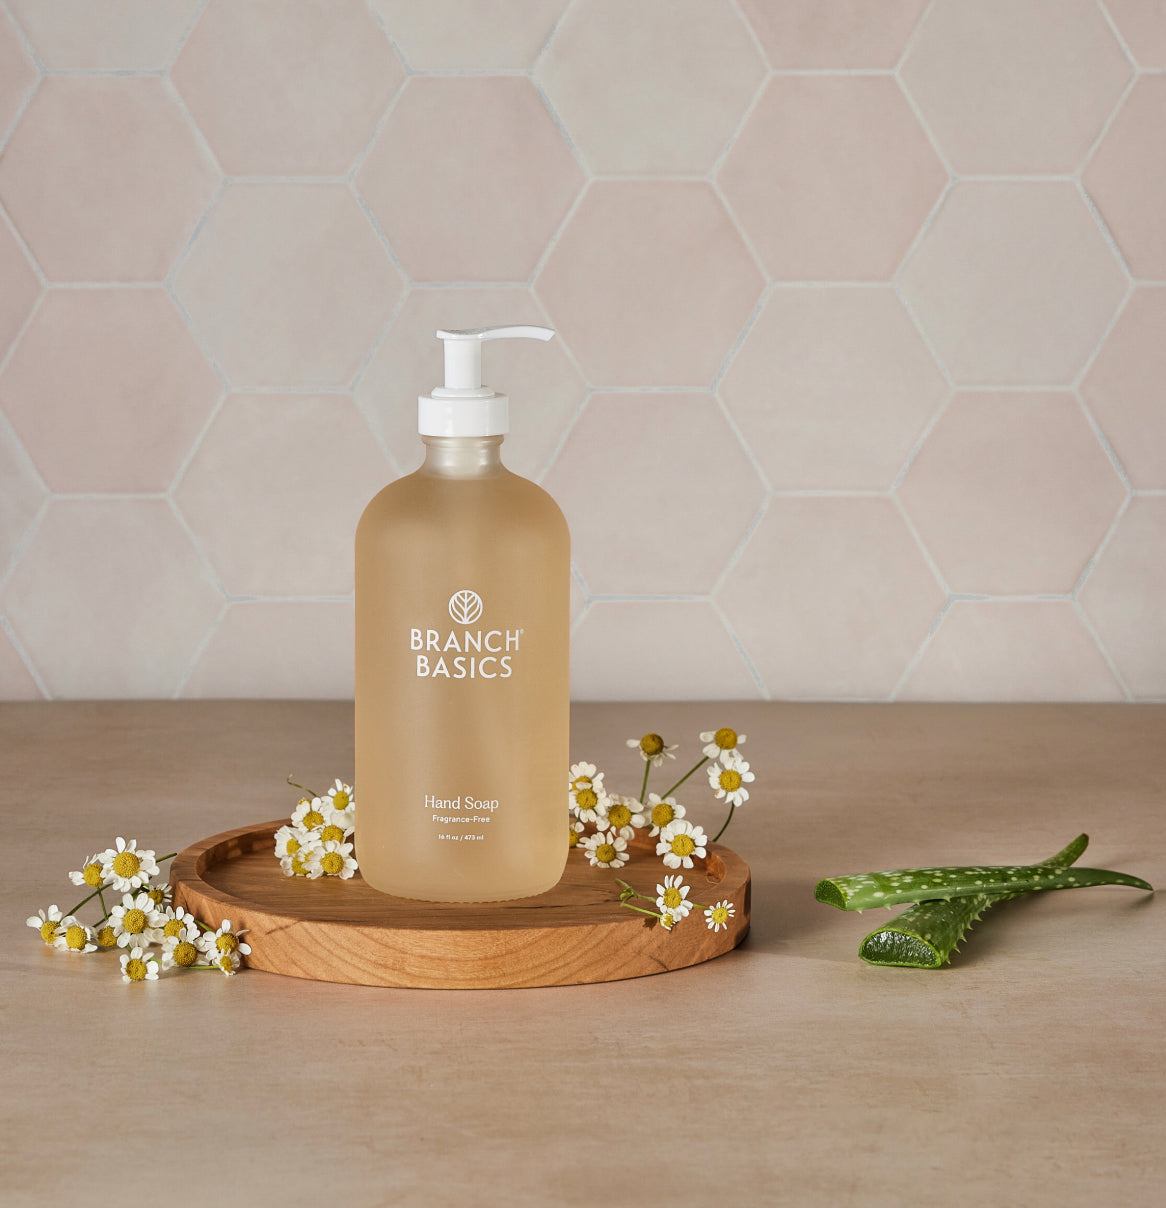 Branch Basics Hand Soap bottle on a wooden pedestal with chamomile and aloe surrounding it.